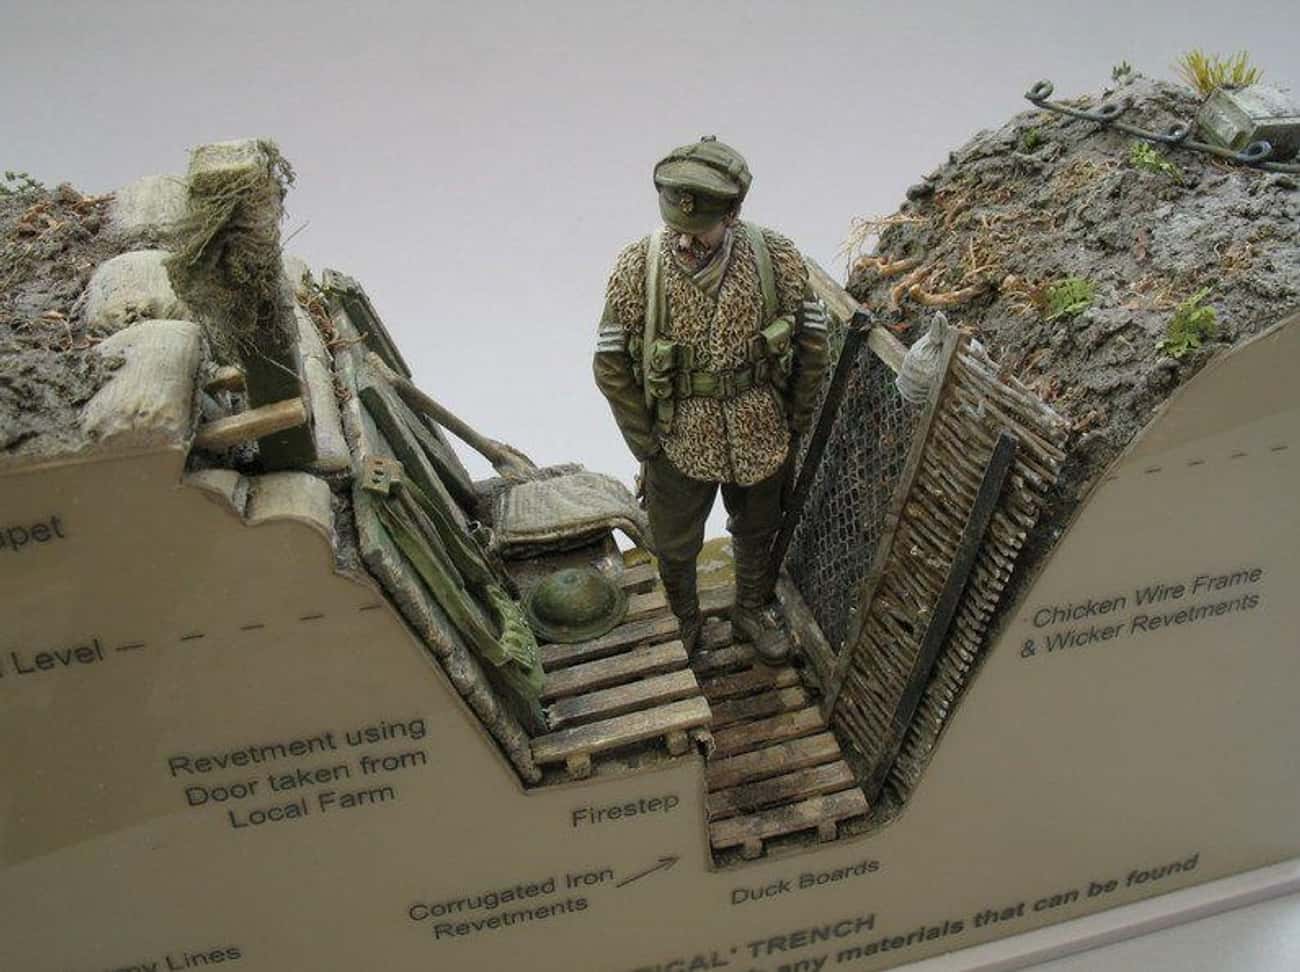 The Models Show How The Trenches Were Built, The Materials Used And Where They Were Located In Relation To The Enemy Line